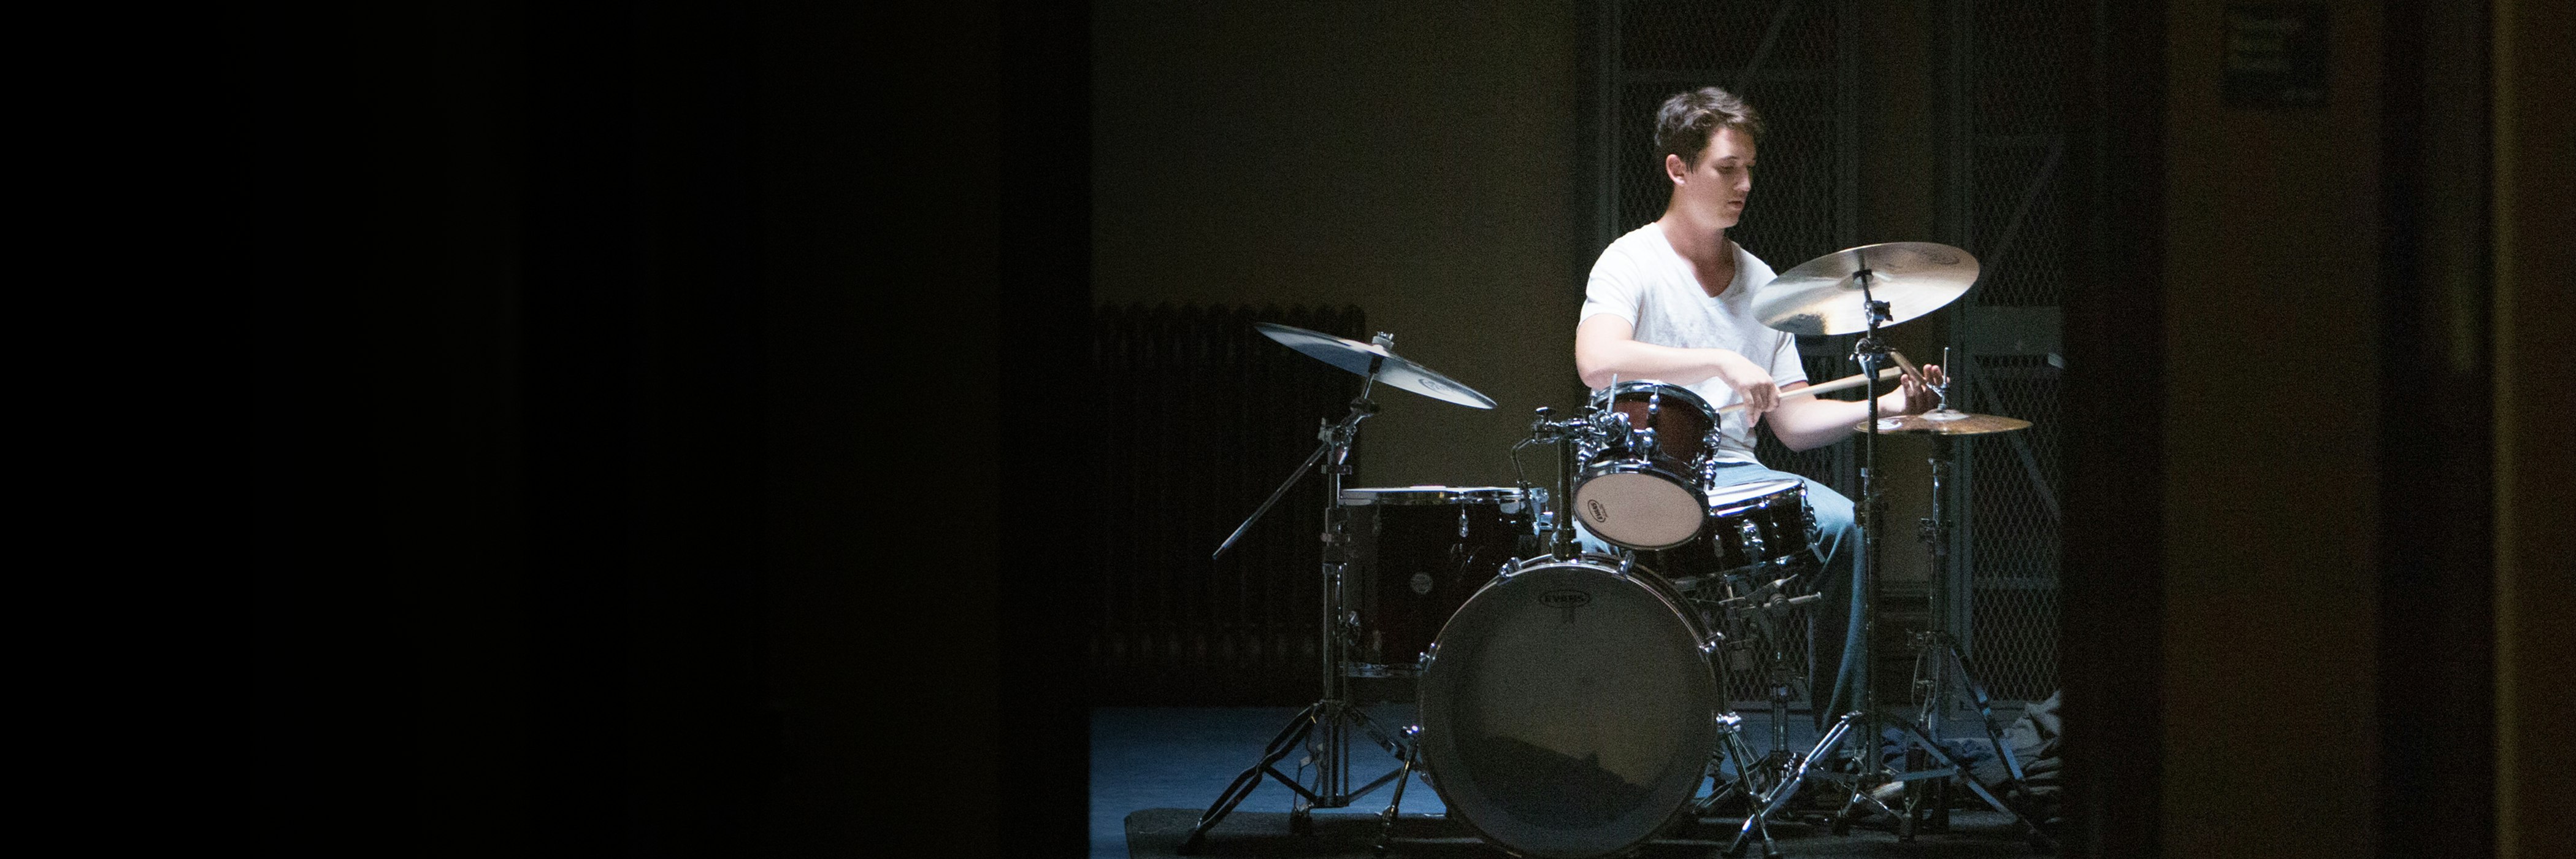 Where can I watch the Whiplash (2014) movie online in HD? - Quora